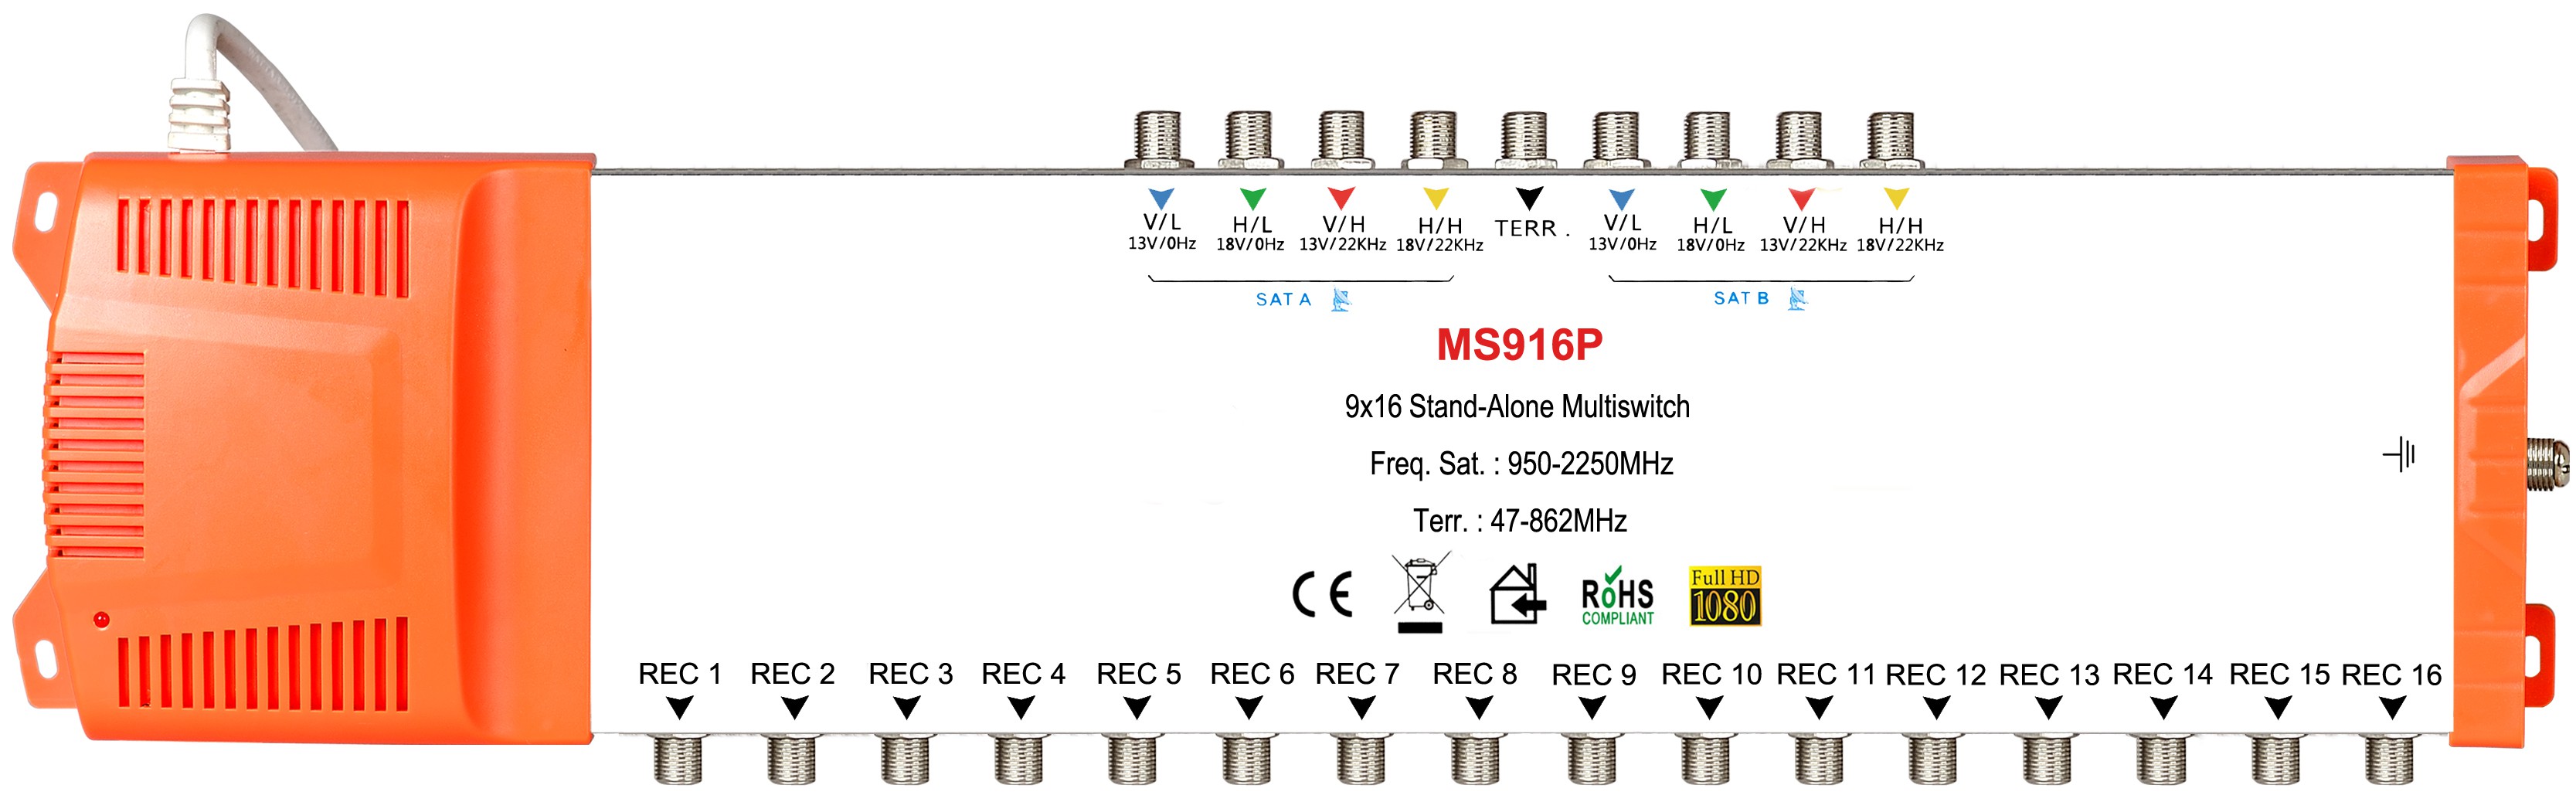 9x16  satellite multi-switch, Stand-Alone multiswitch, with power supply